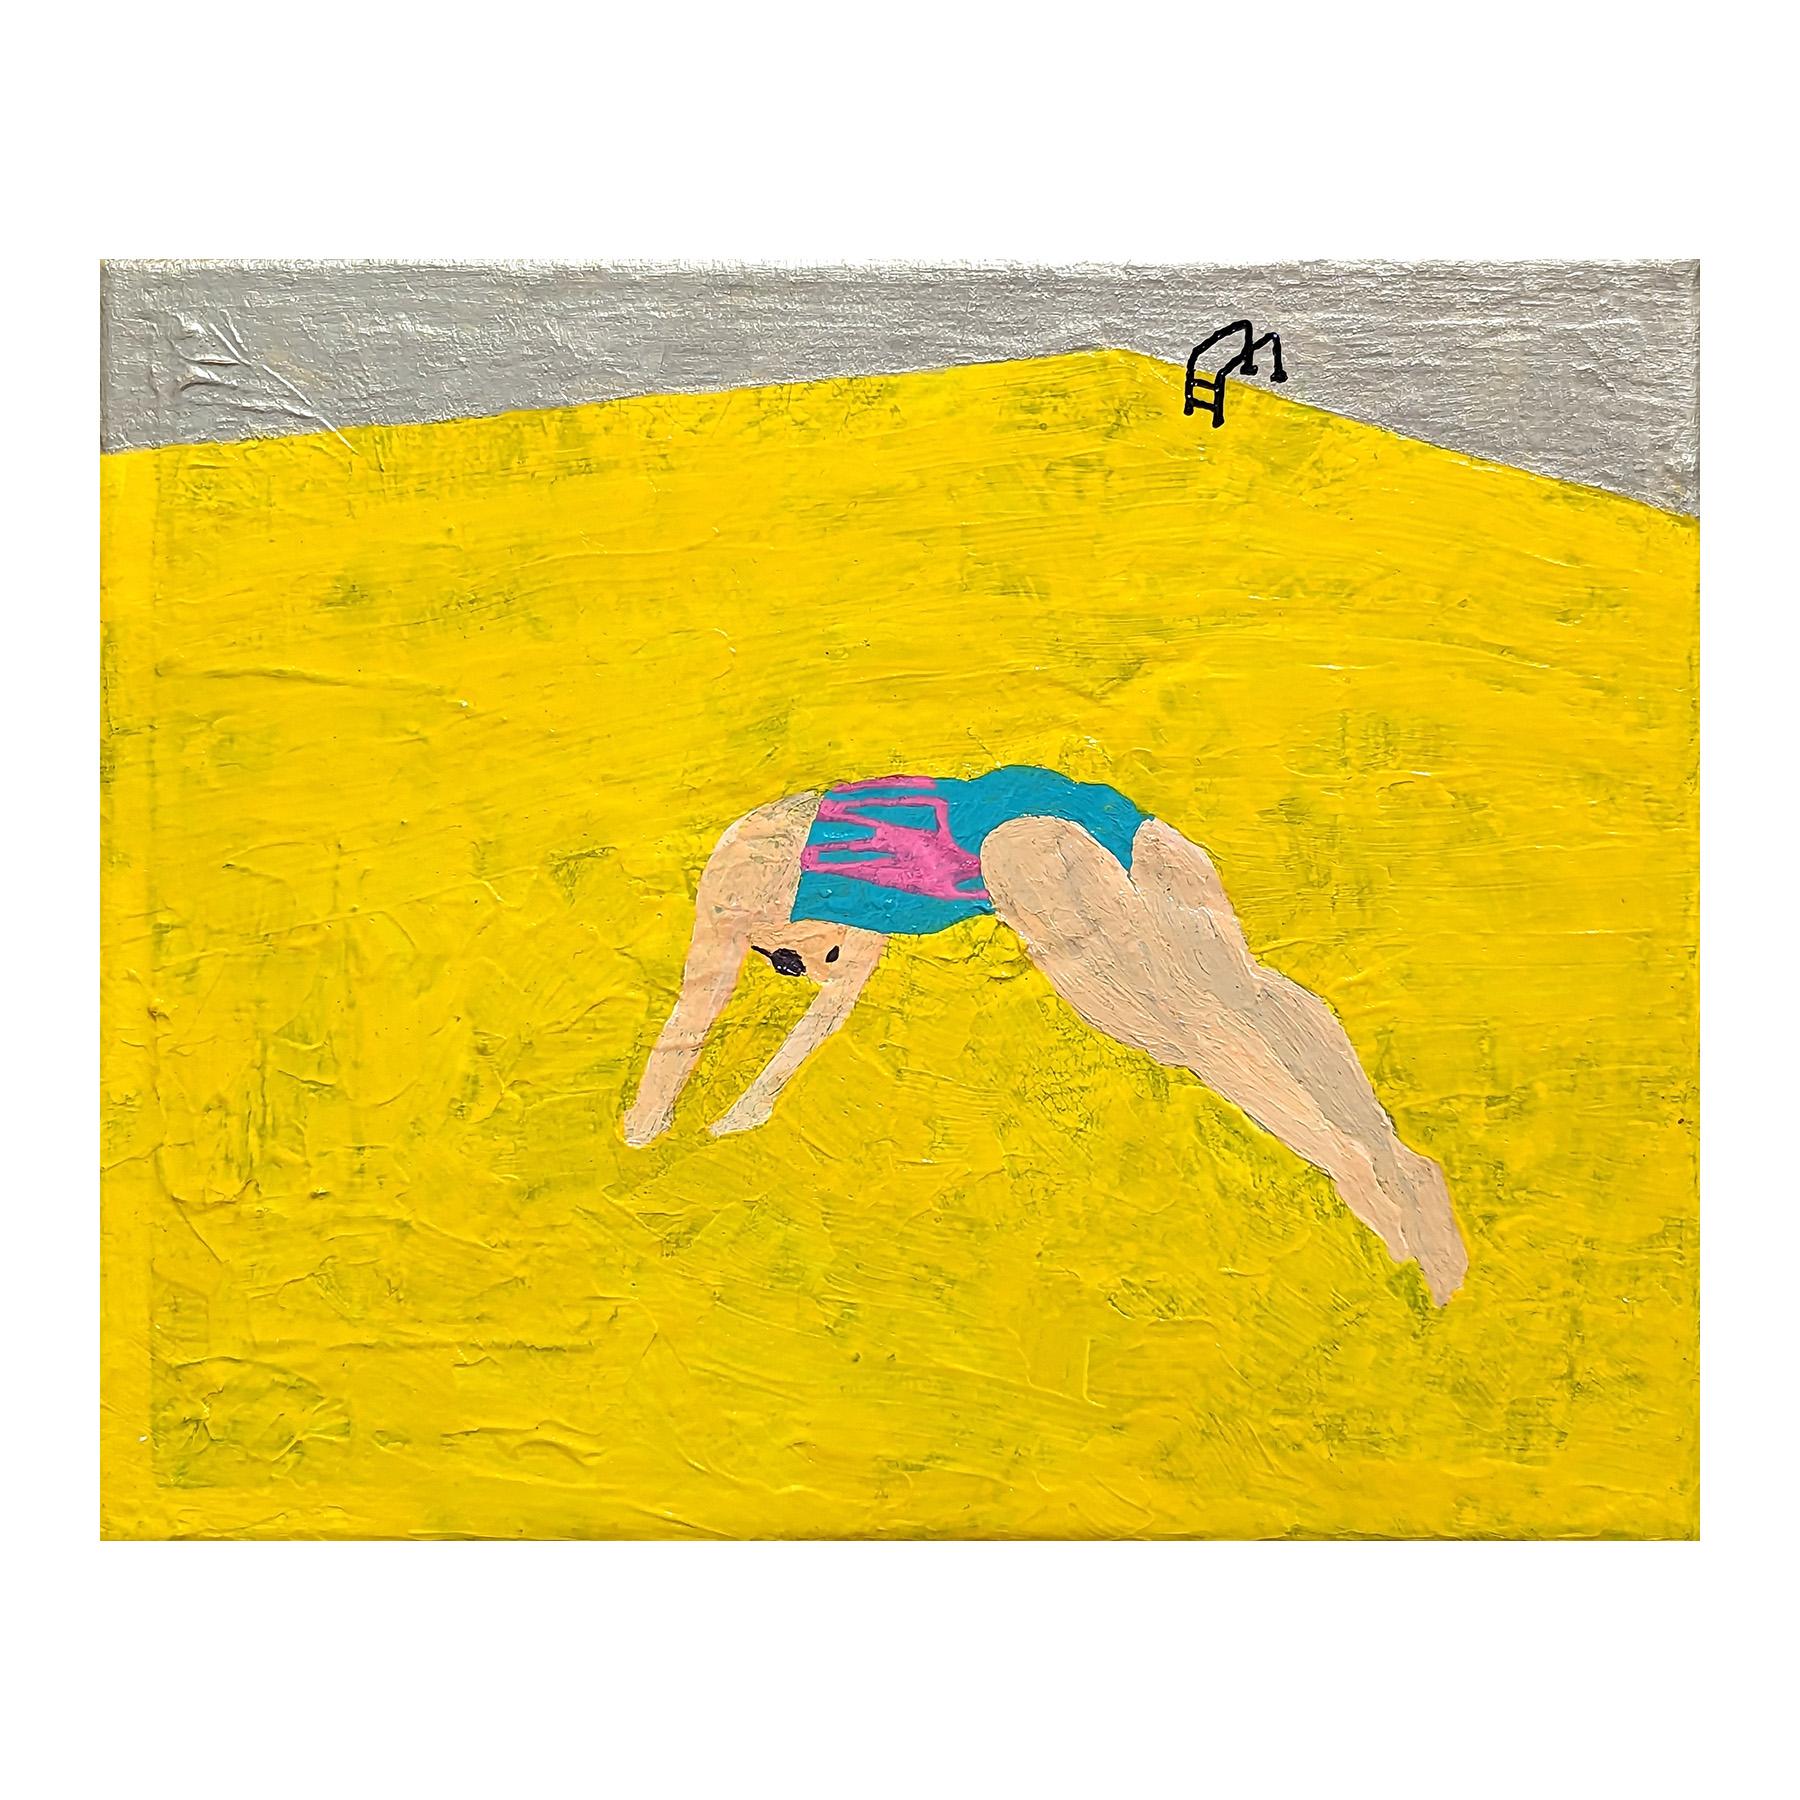 Colorful dark humor painting by Memphis-based contemporary artist Alex Paulus. The work features a swimmer dressed in a blue and pink suit and goggles getting ready to dive into a yellow pool. The scene is set against a metallic silver background.